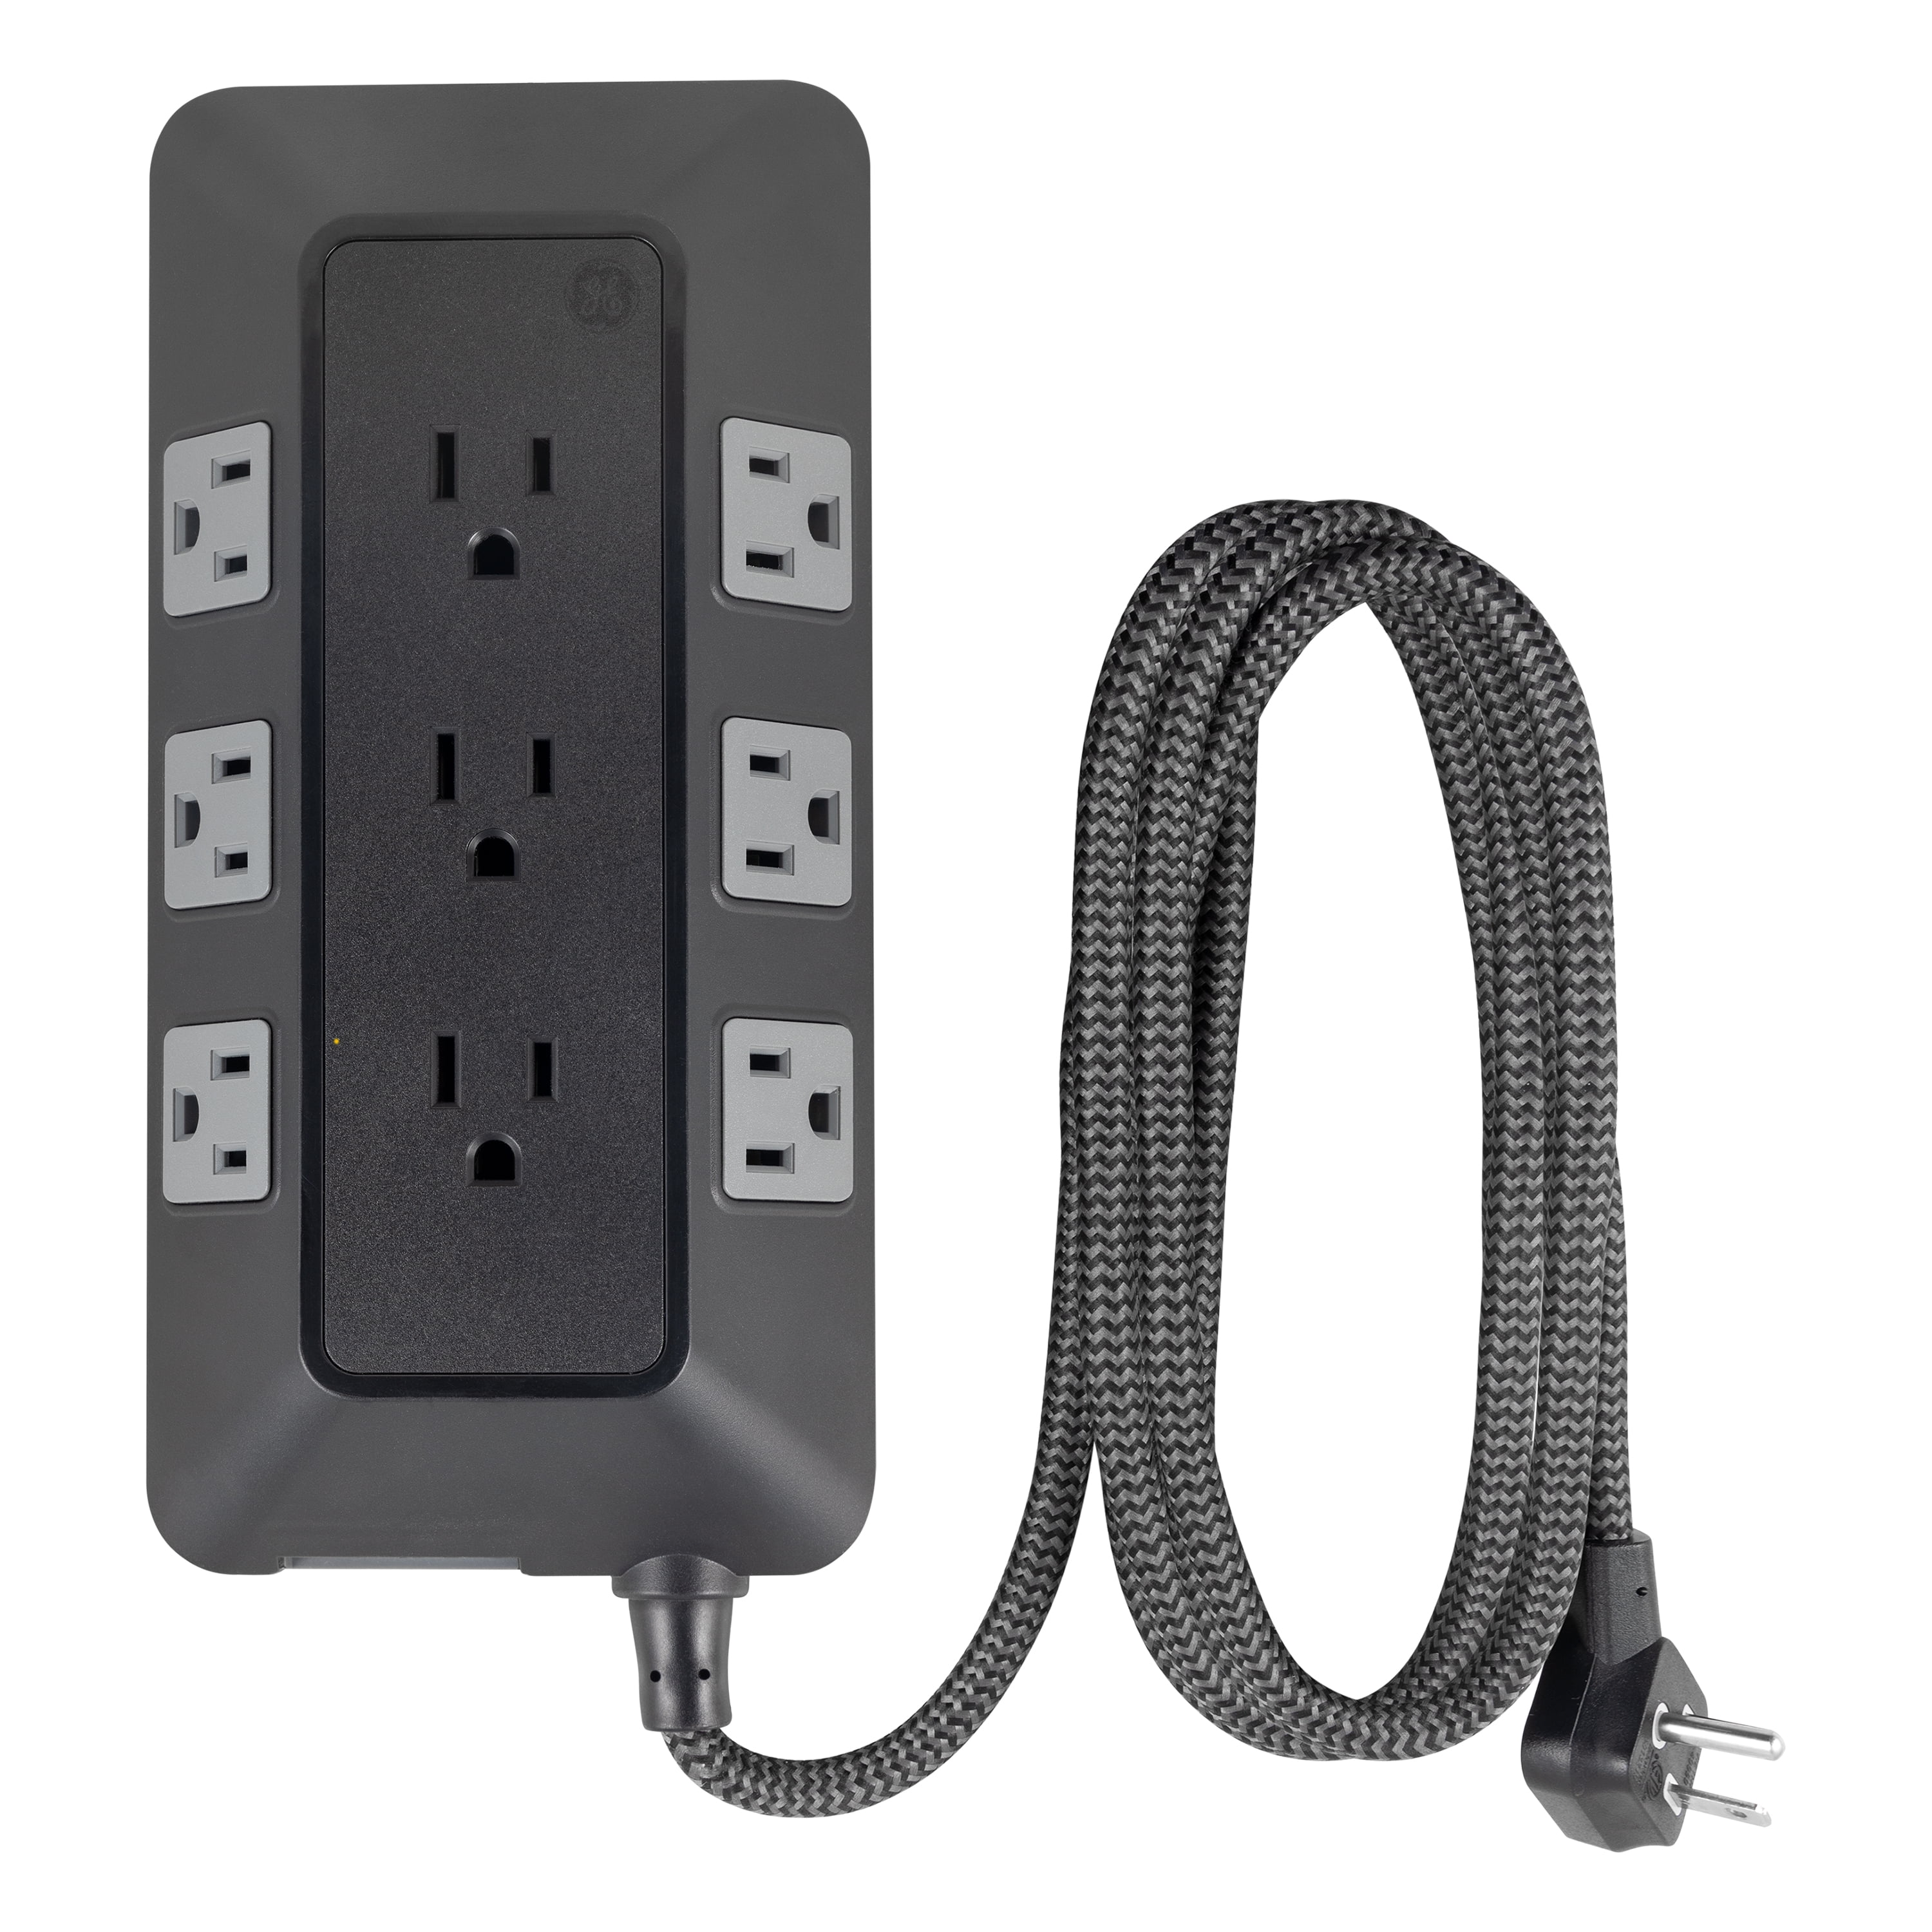 GE 6-Outlet Grounded Power Strip with 12 ft. Long Extension Cord